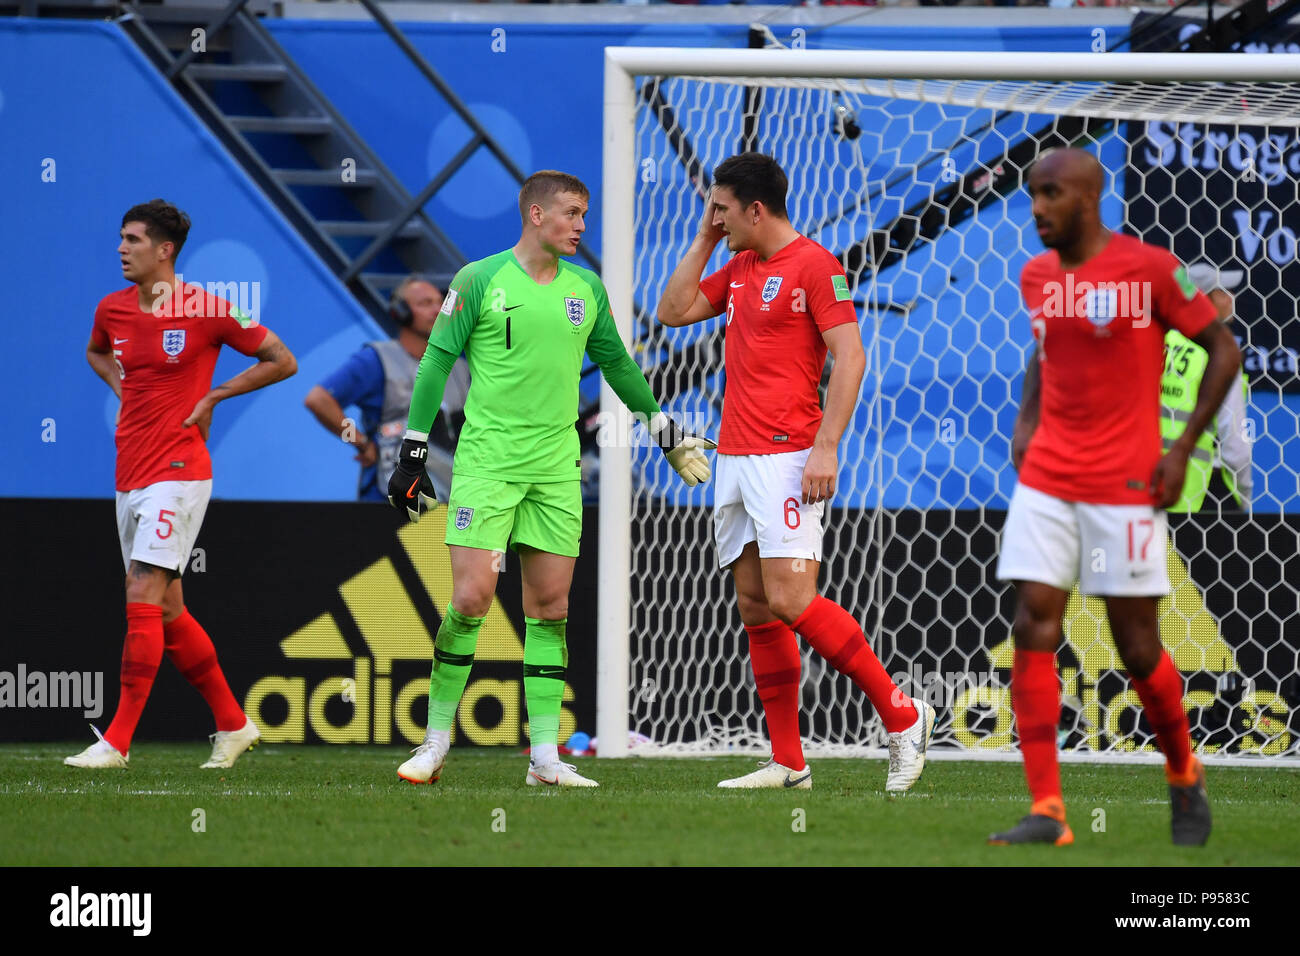 St. Petersburg, Russland. 14th July, 2018. See: John STONES (ENG), goalkeeper Jordan PICKFORD (ENG), Harry MAGUIRE (ENG), Fabian DELPH (ENG). after versustor, disappointment, frustrated, disappointed, frustrated, dejected, action. Belgium (BEL) - ENGLAND (ENG) 2-0, match 63, match for 3rd place, on 07/14/2018 in Saint Petersburg, Arena Saint Petersburg, Football World Cup 2018 in Russia from 14.06. - 15.07.2018. | usage worldwide Credit: dpa/Alamy Live News Stock Photo